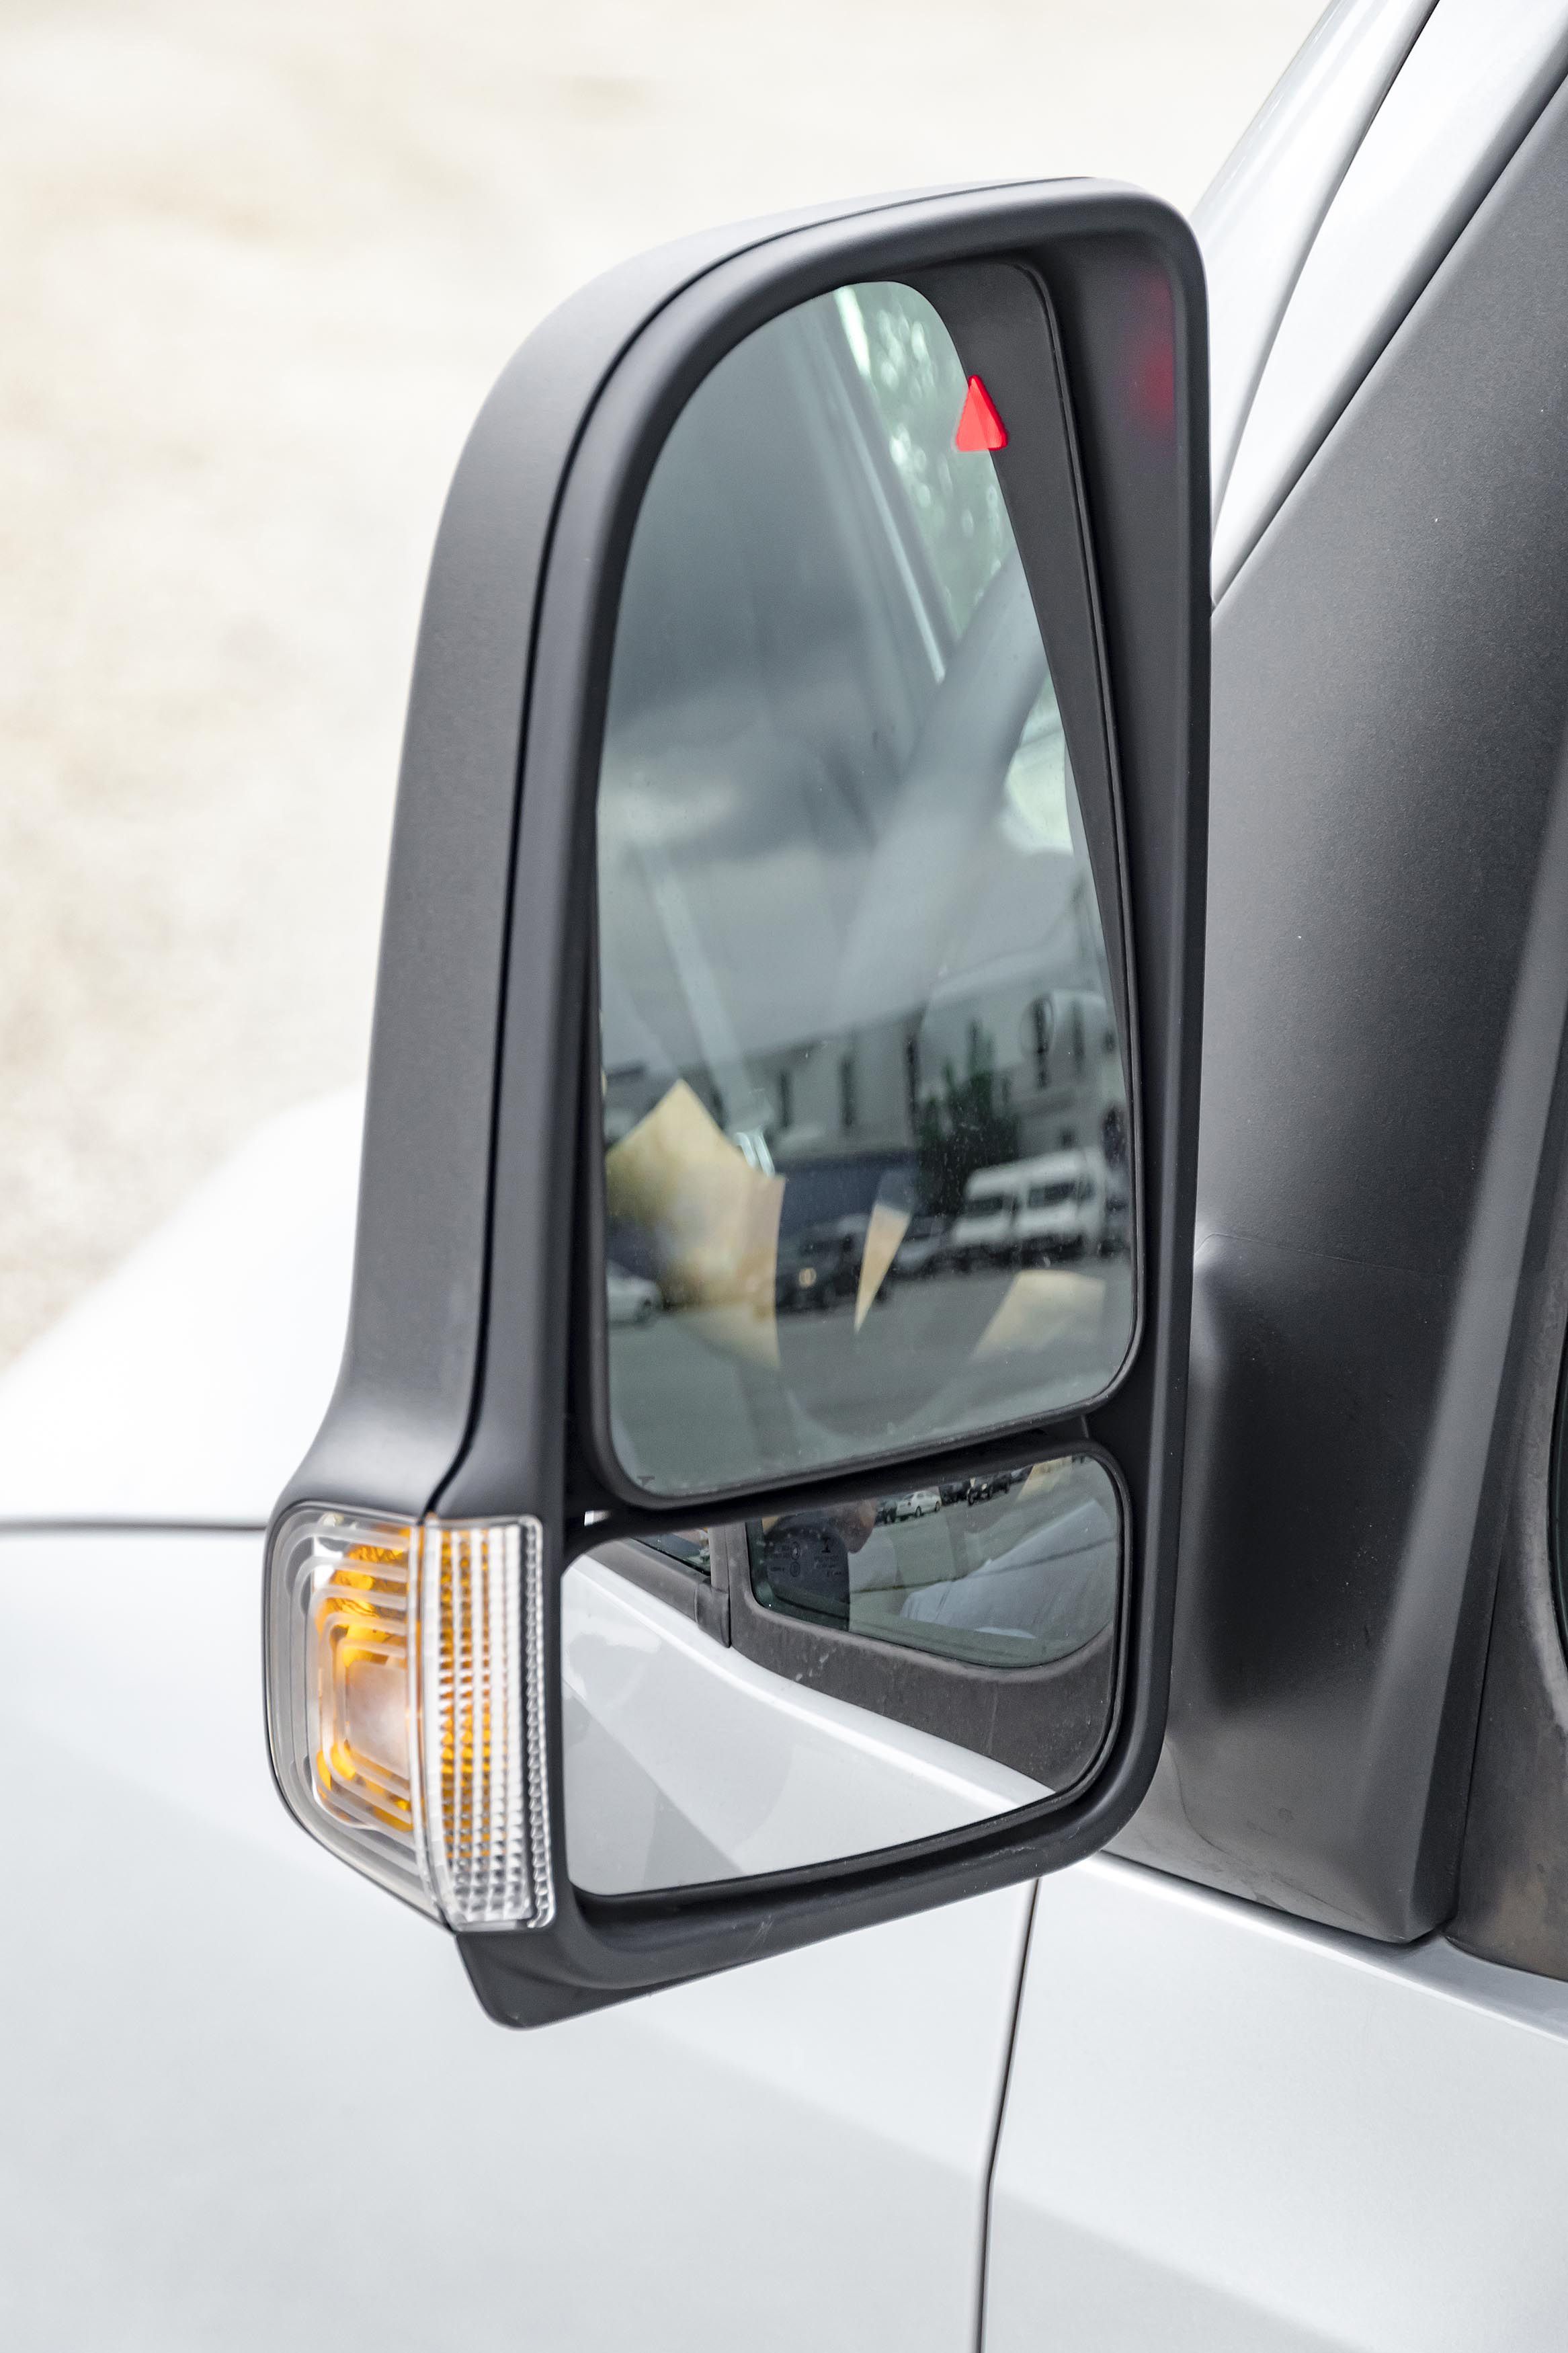 What is a blind spot ?